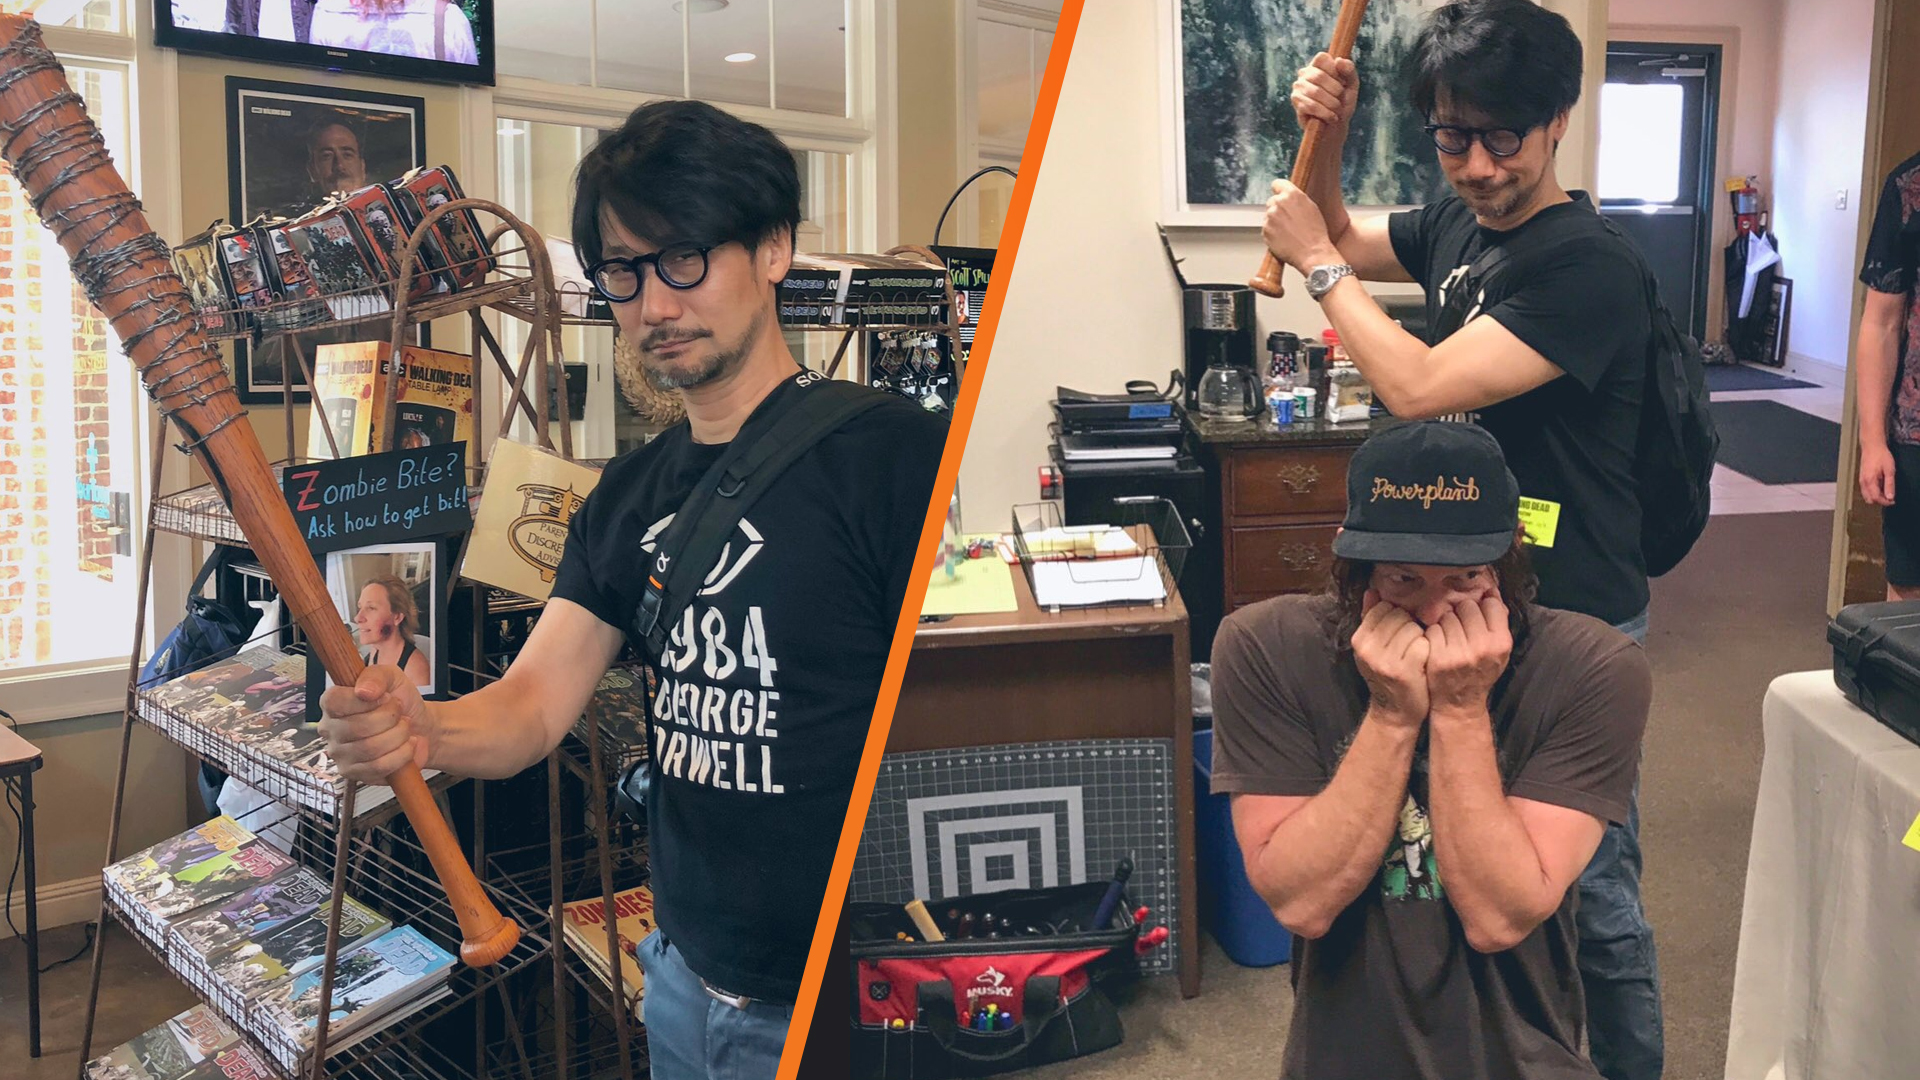 Kojima drops weird cryptic symbols to hype Death Stranding 2 or new horror  game